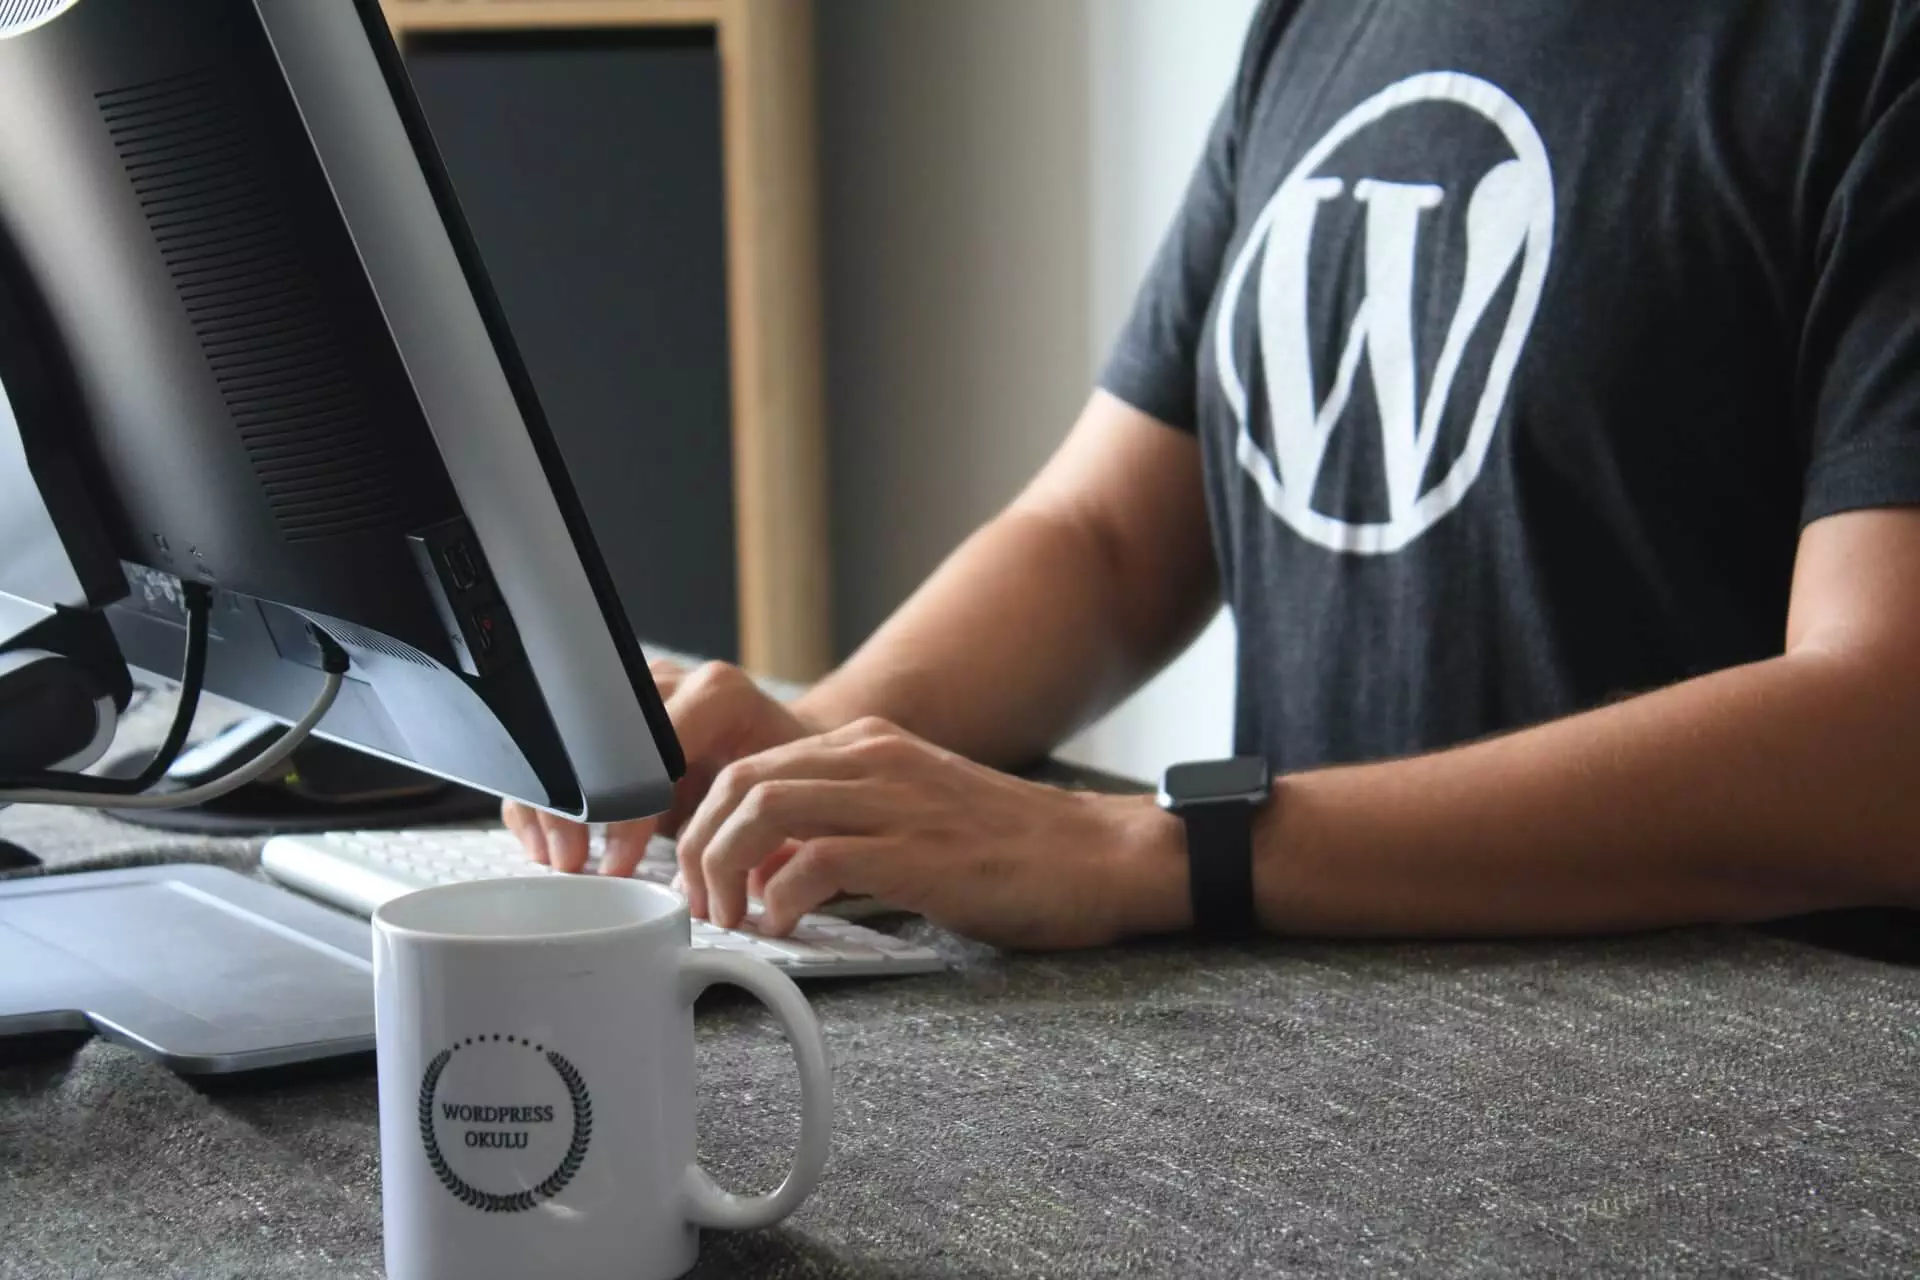 A Man Typing On A Computer With The Wordpress Logo.